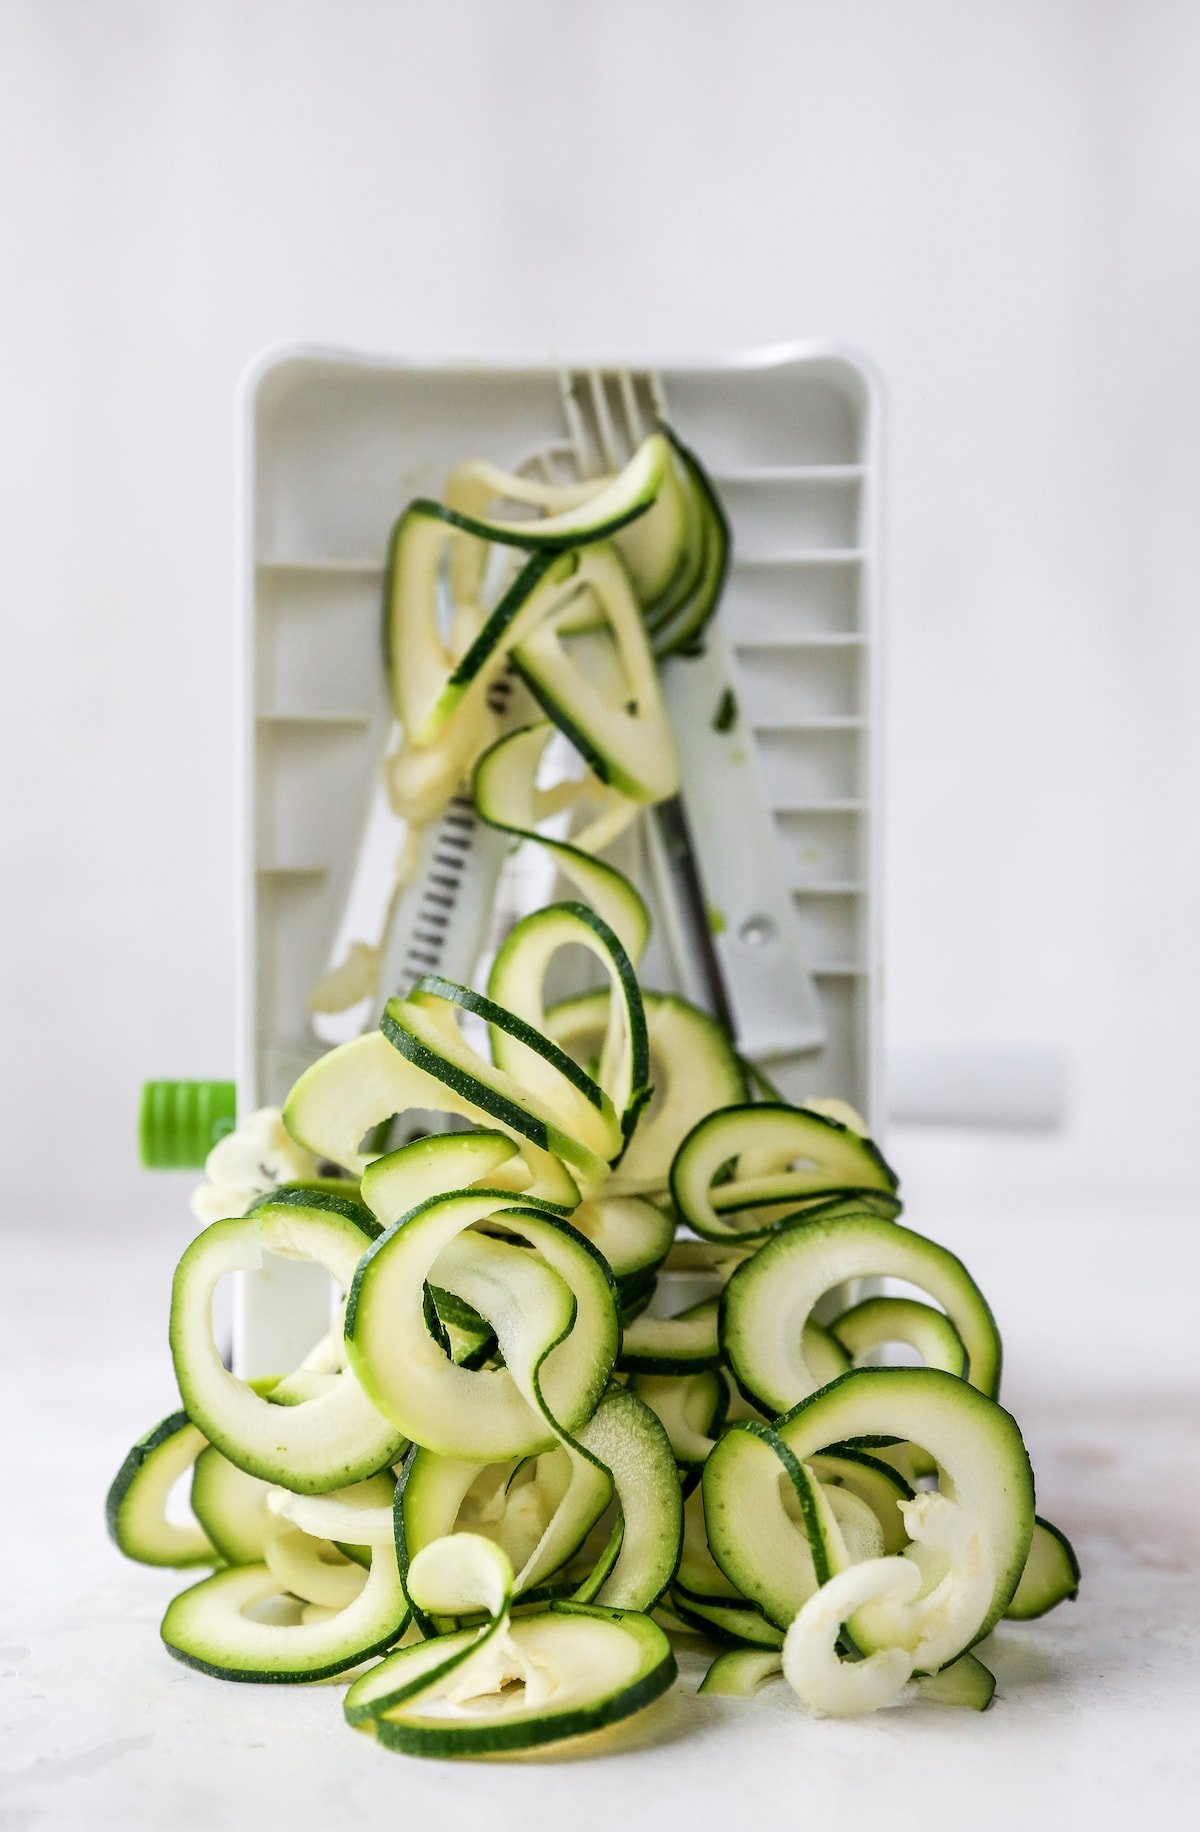 Zucchini noddles being made with a spiralizer.